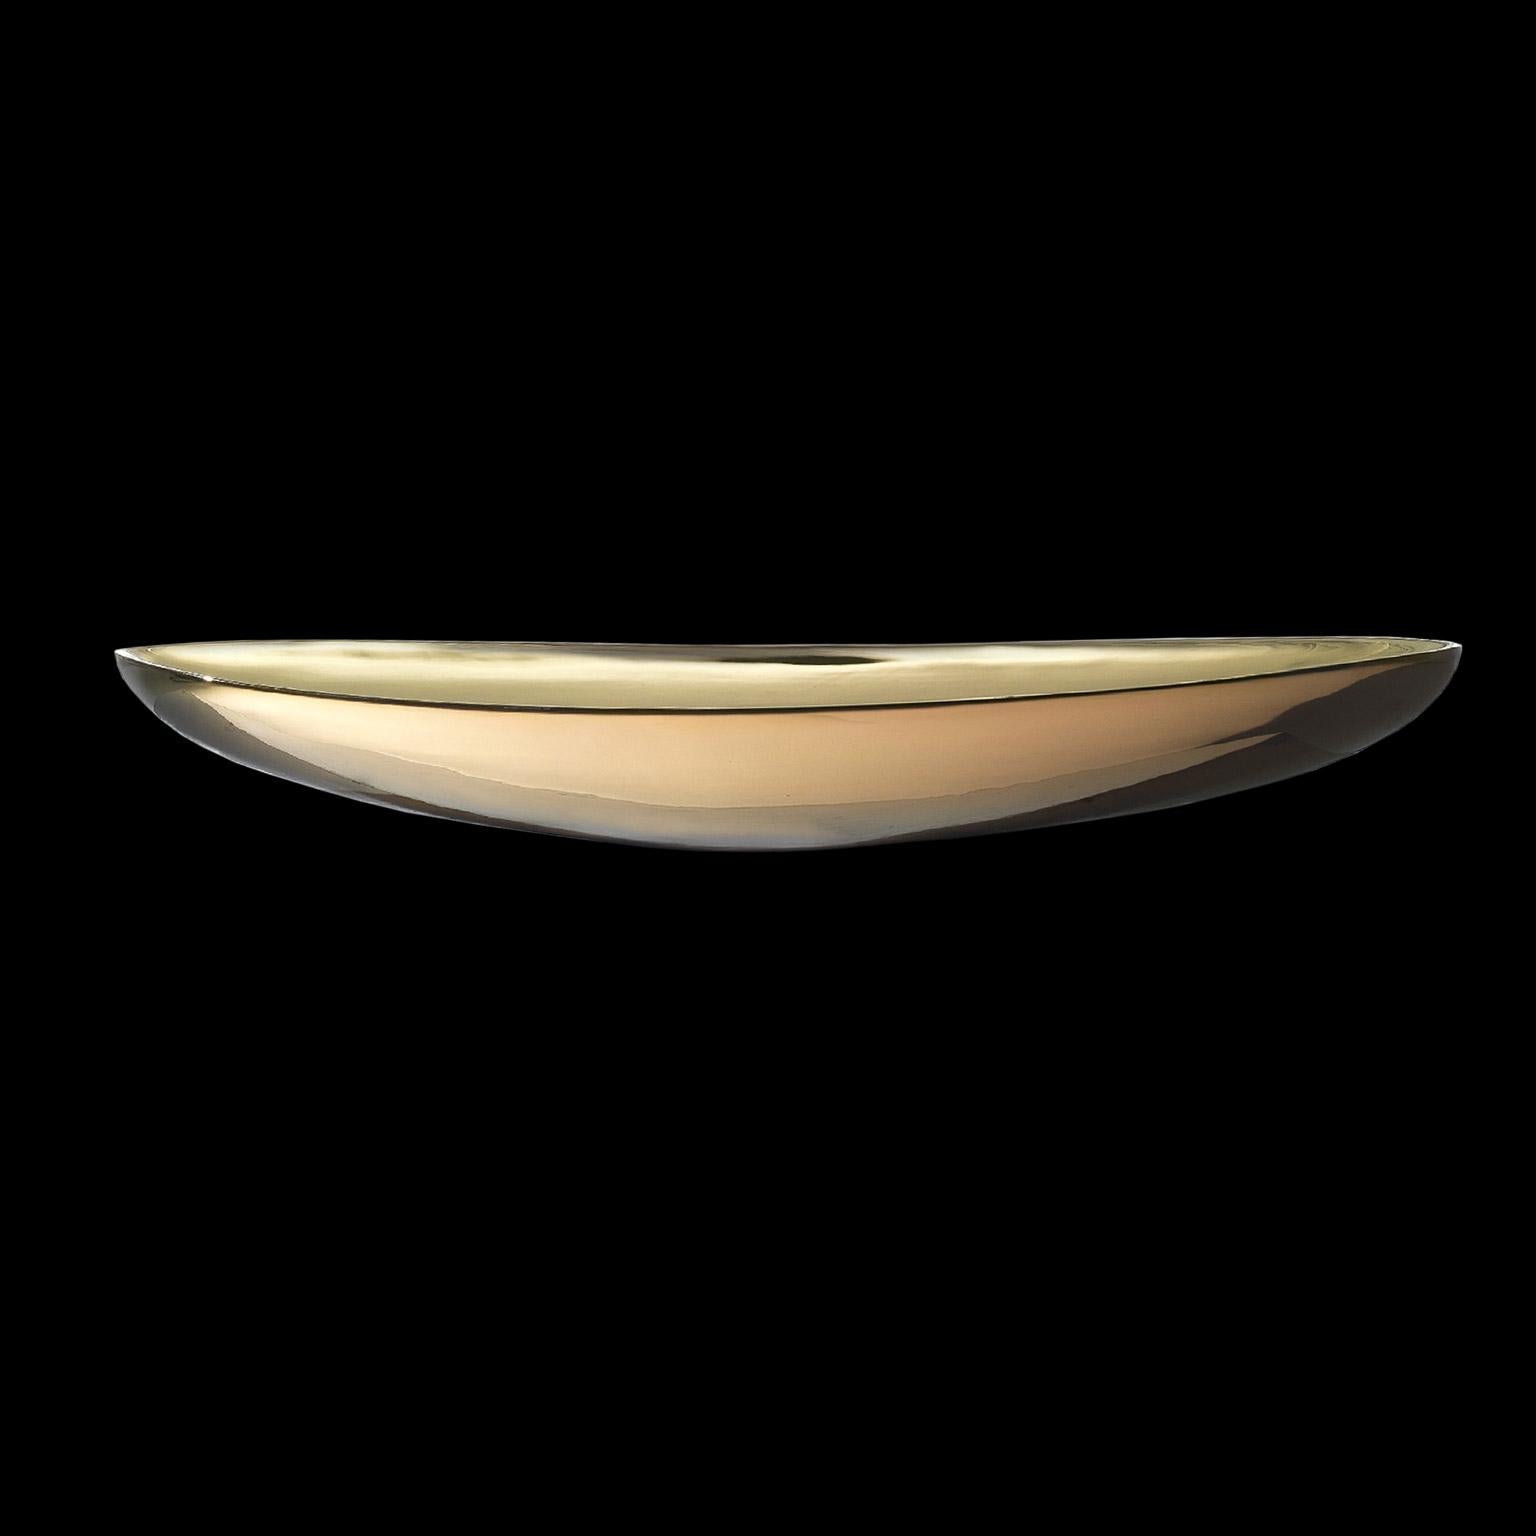 Ceramic oval plate COSMOS fully handcrafted in bronze outside and 24-karat gold inside

code K011
measures: 86.0 cm. x 30.5 x H. 10.0 cm.